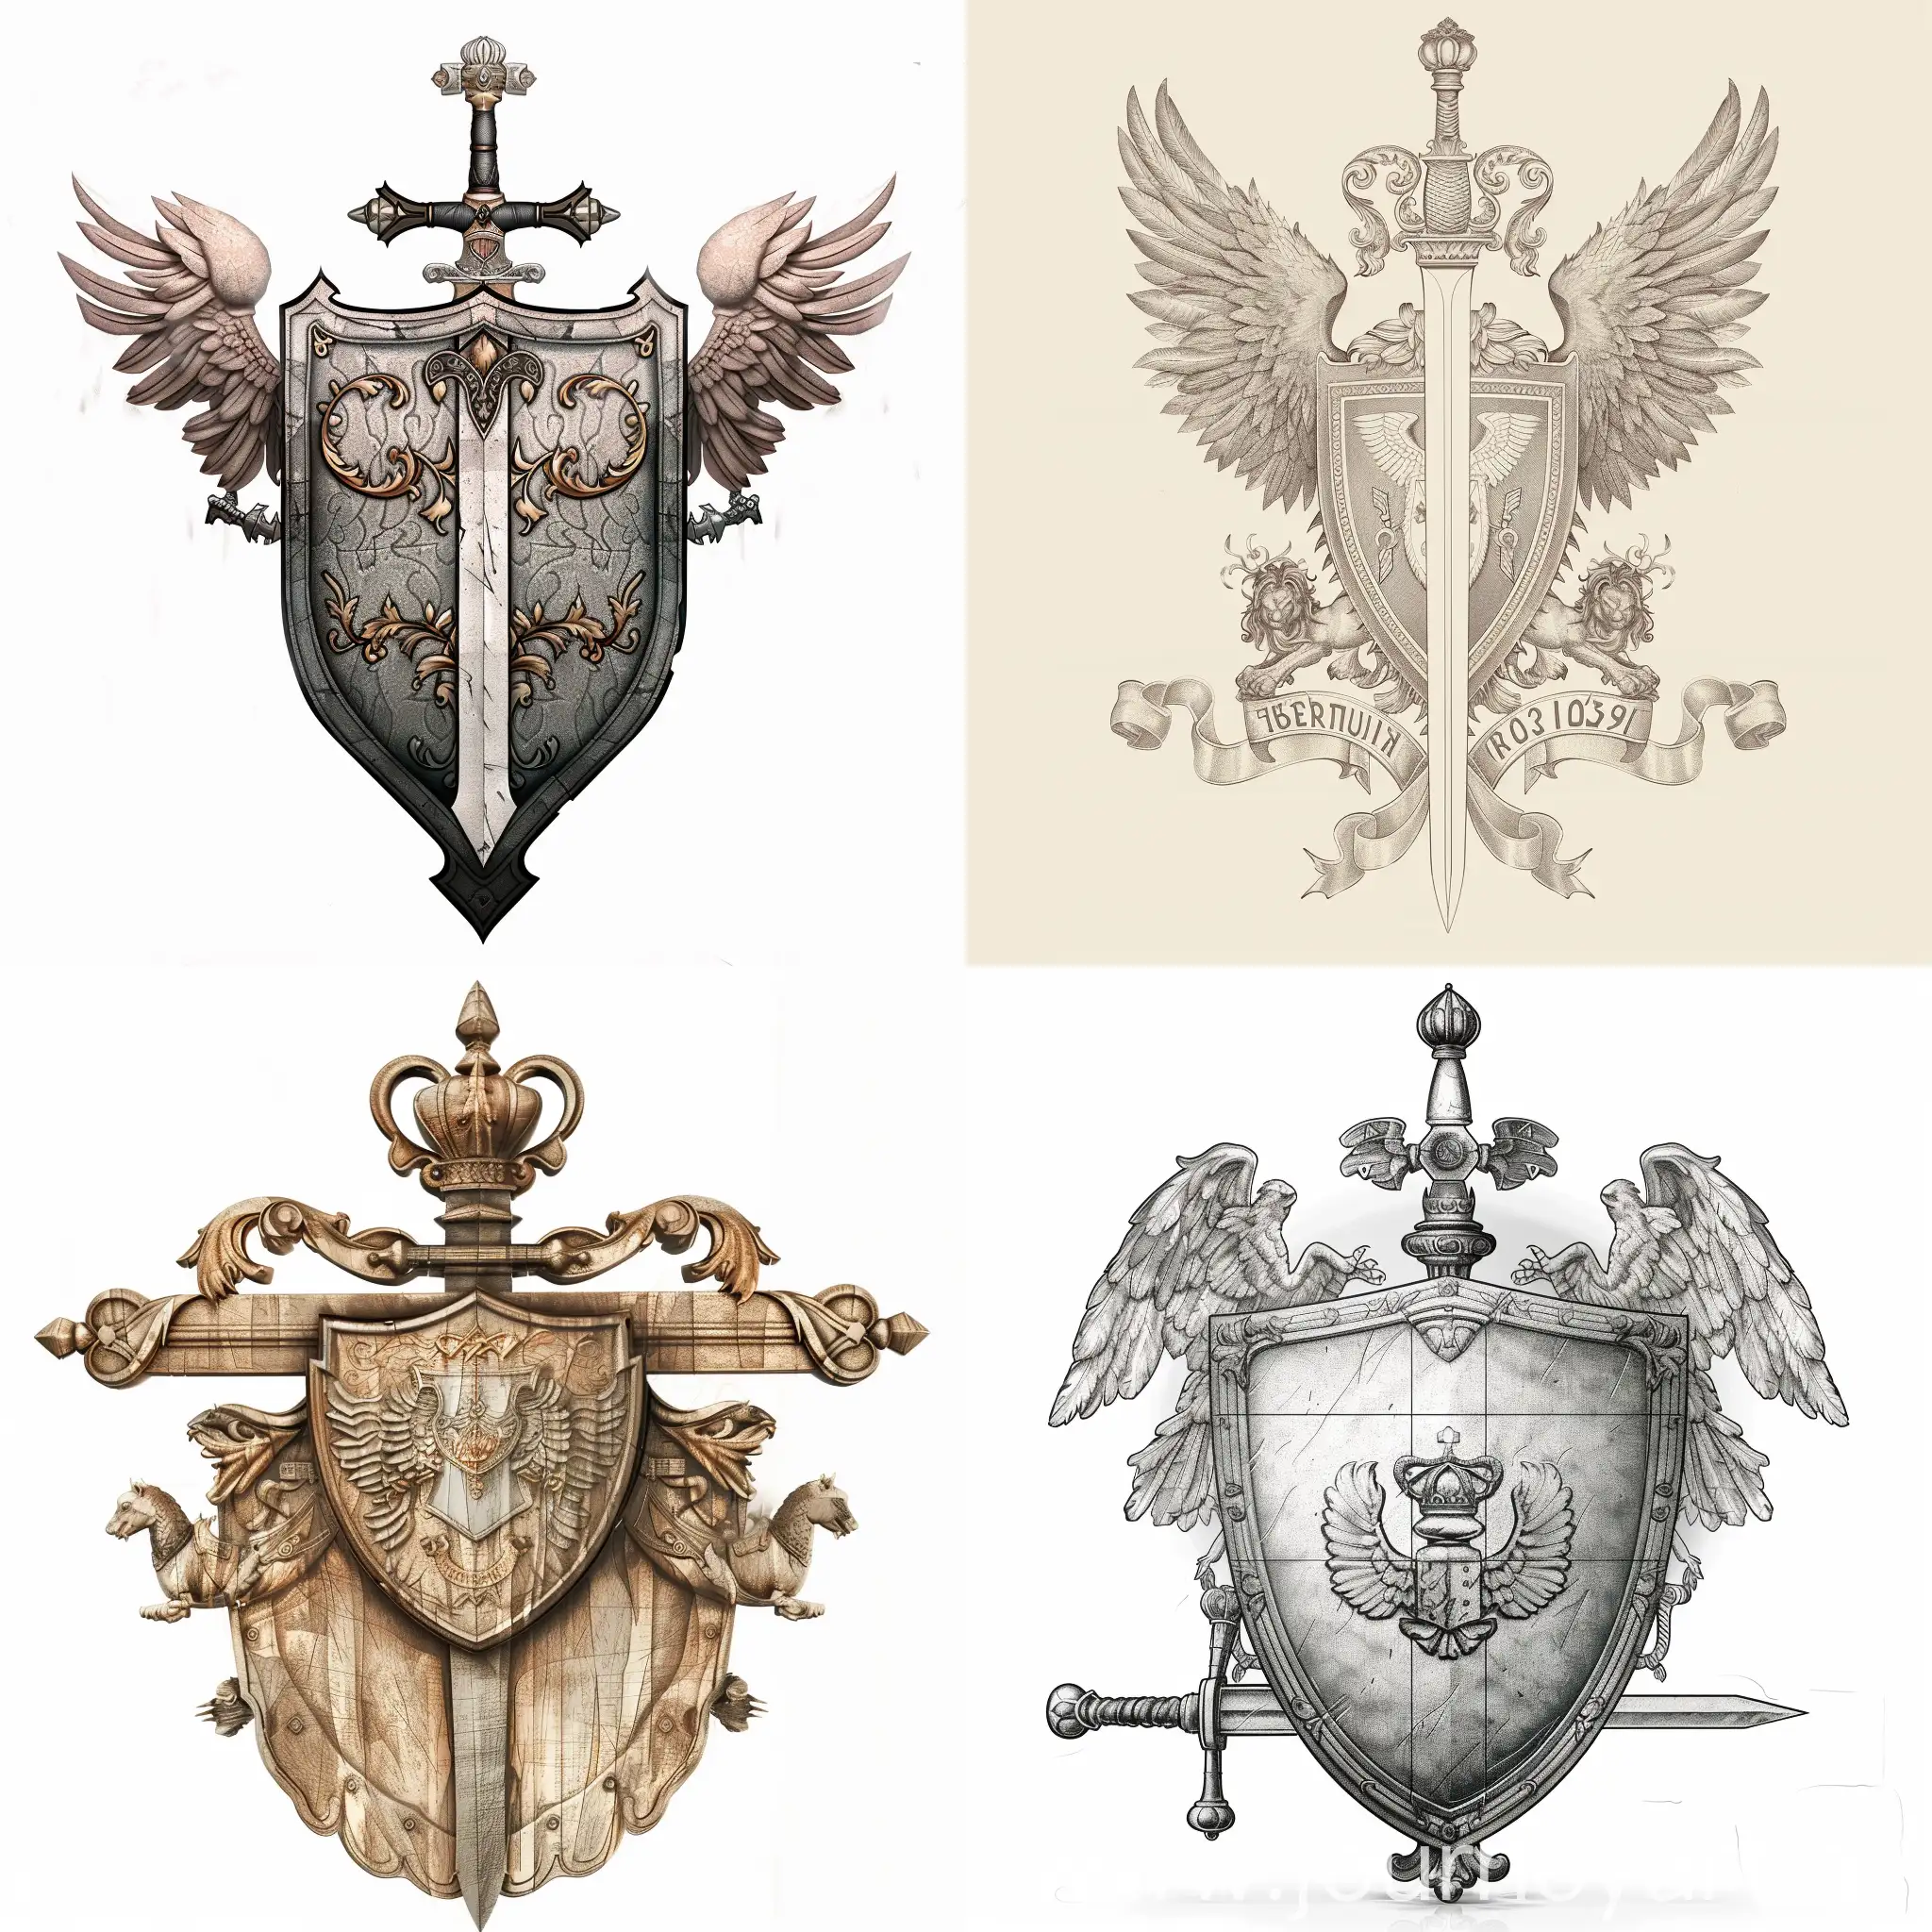 Schematic-Coat-of-Arms-with-Shield-and-Sword-on-Empty-Background